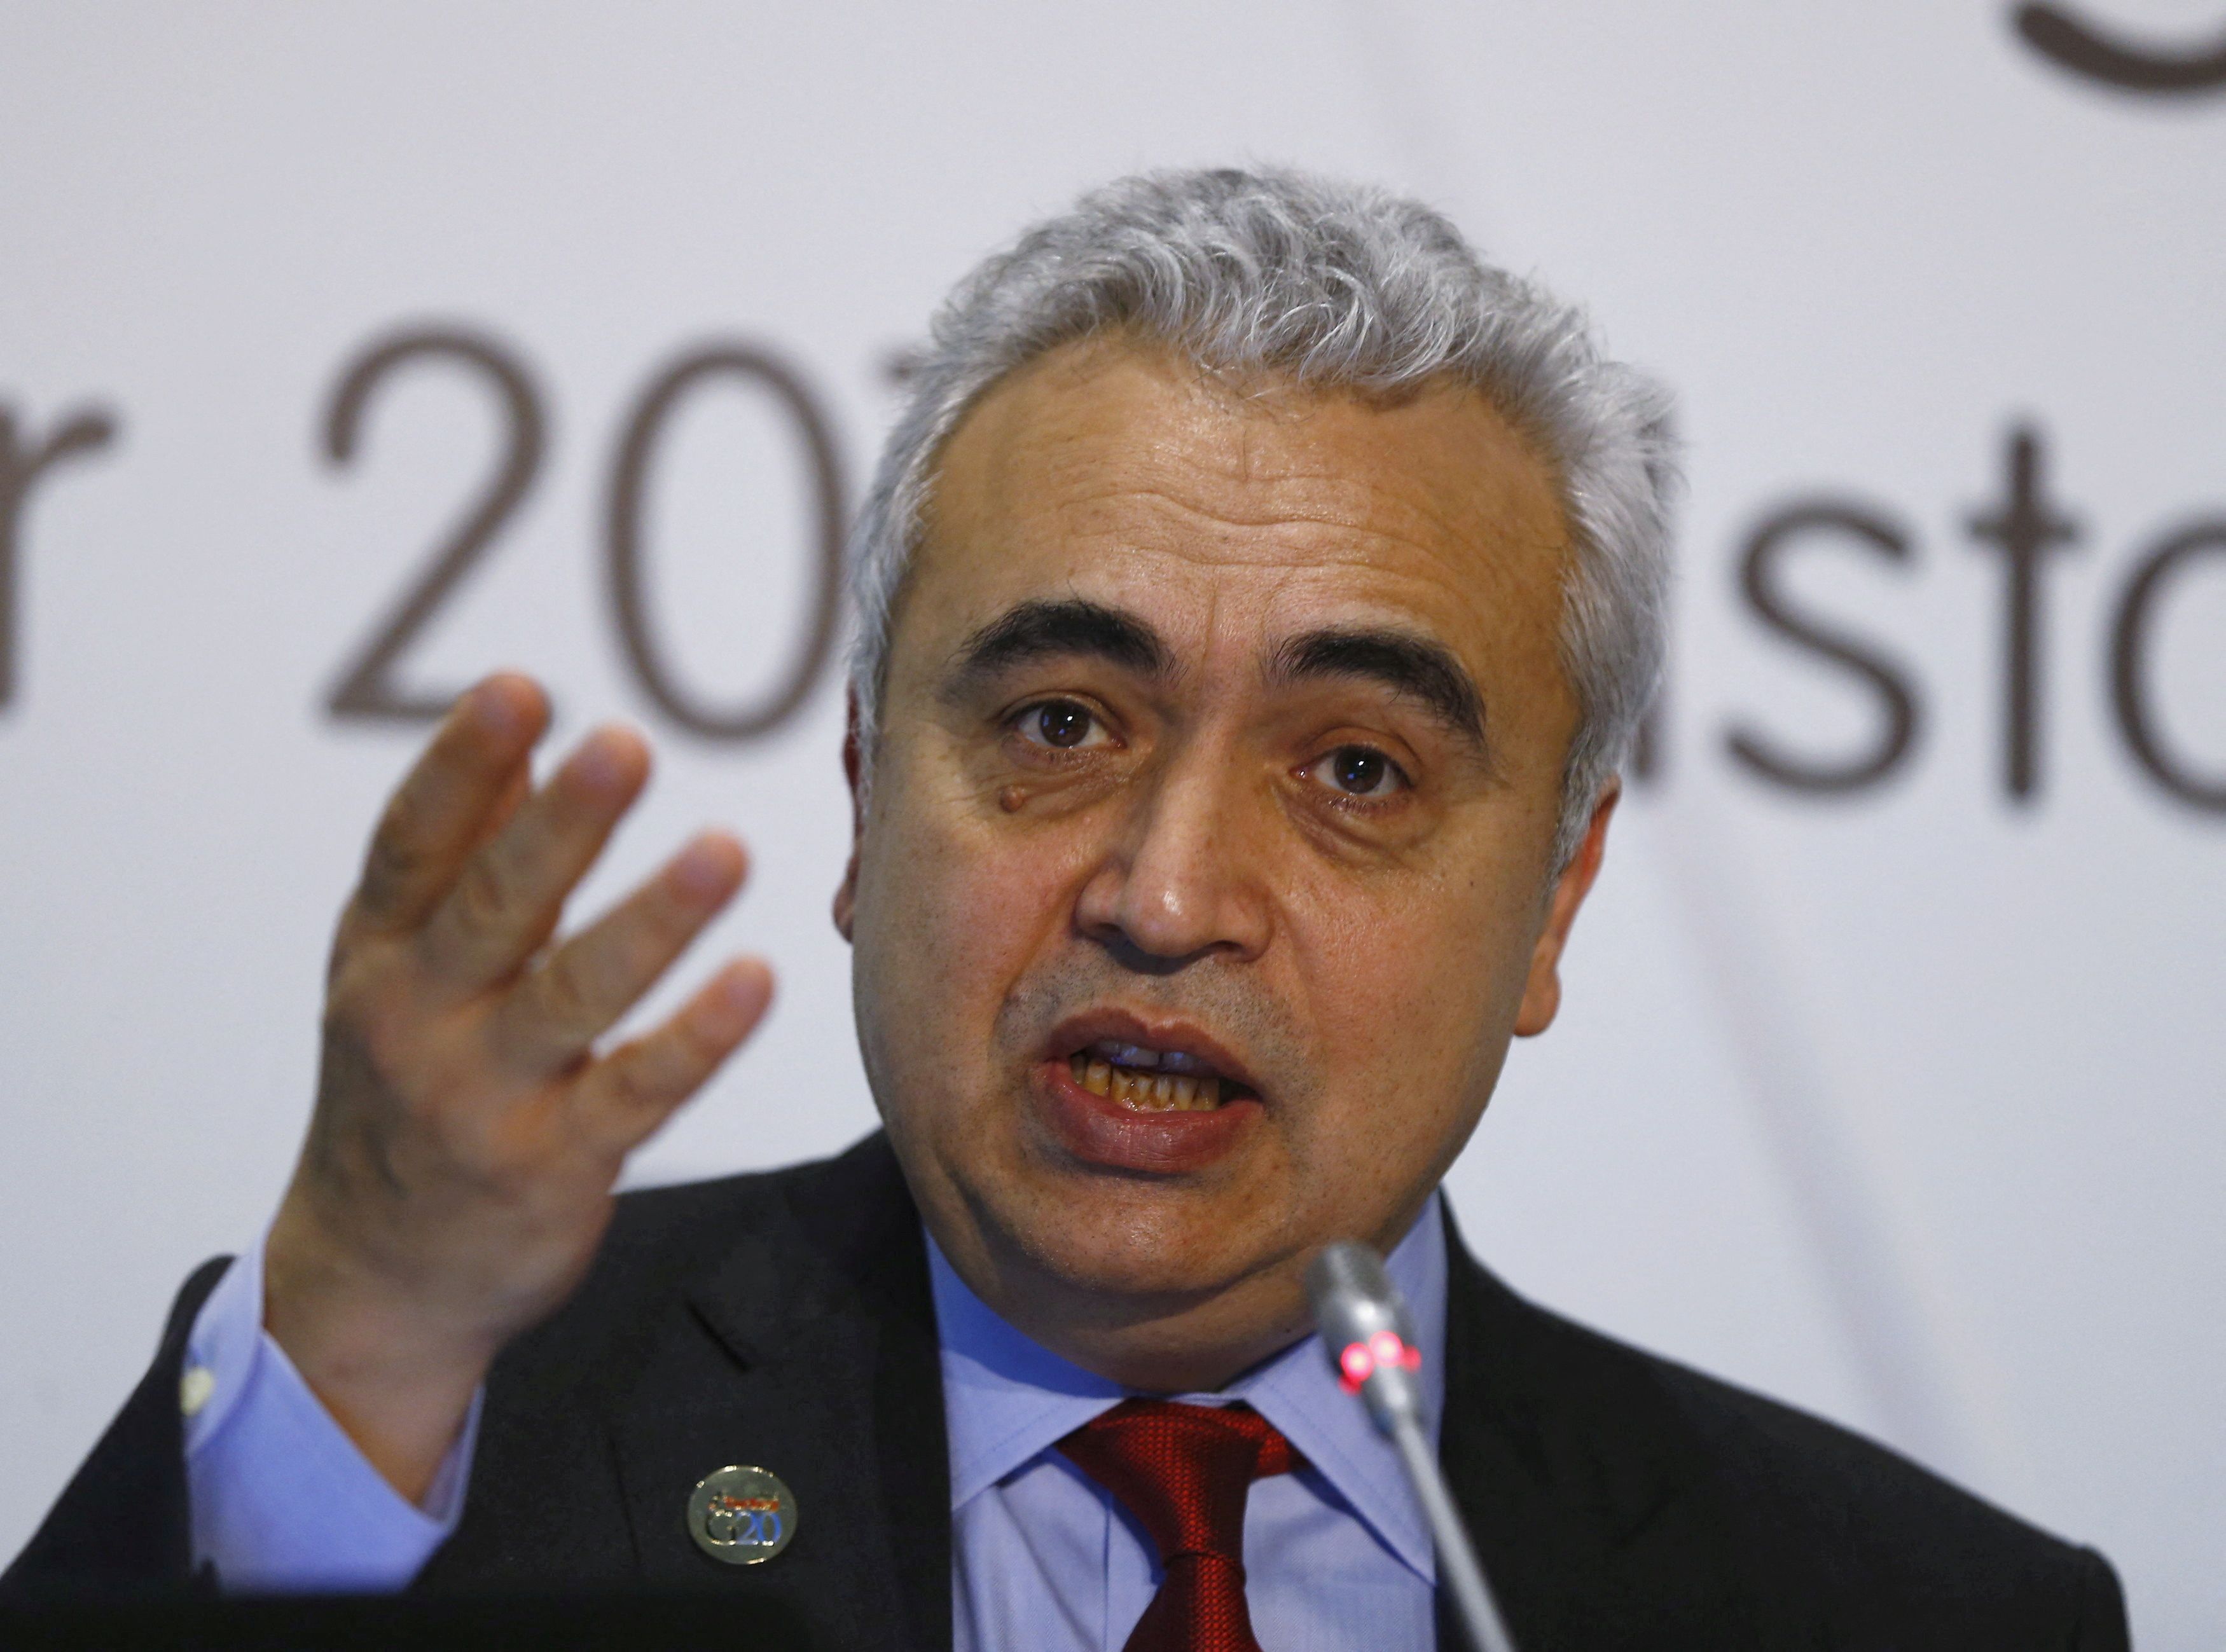 International Energy Agency chief Birol speaks at a news conference on the sidelines of G20 Energy Ministers Meeting in Istanbul